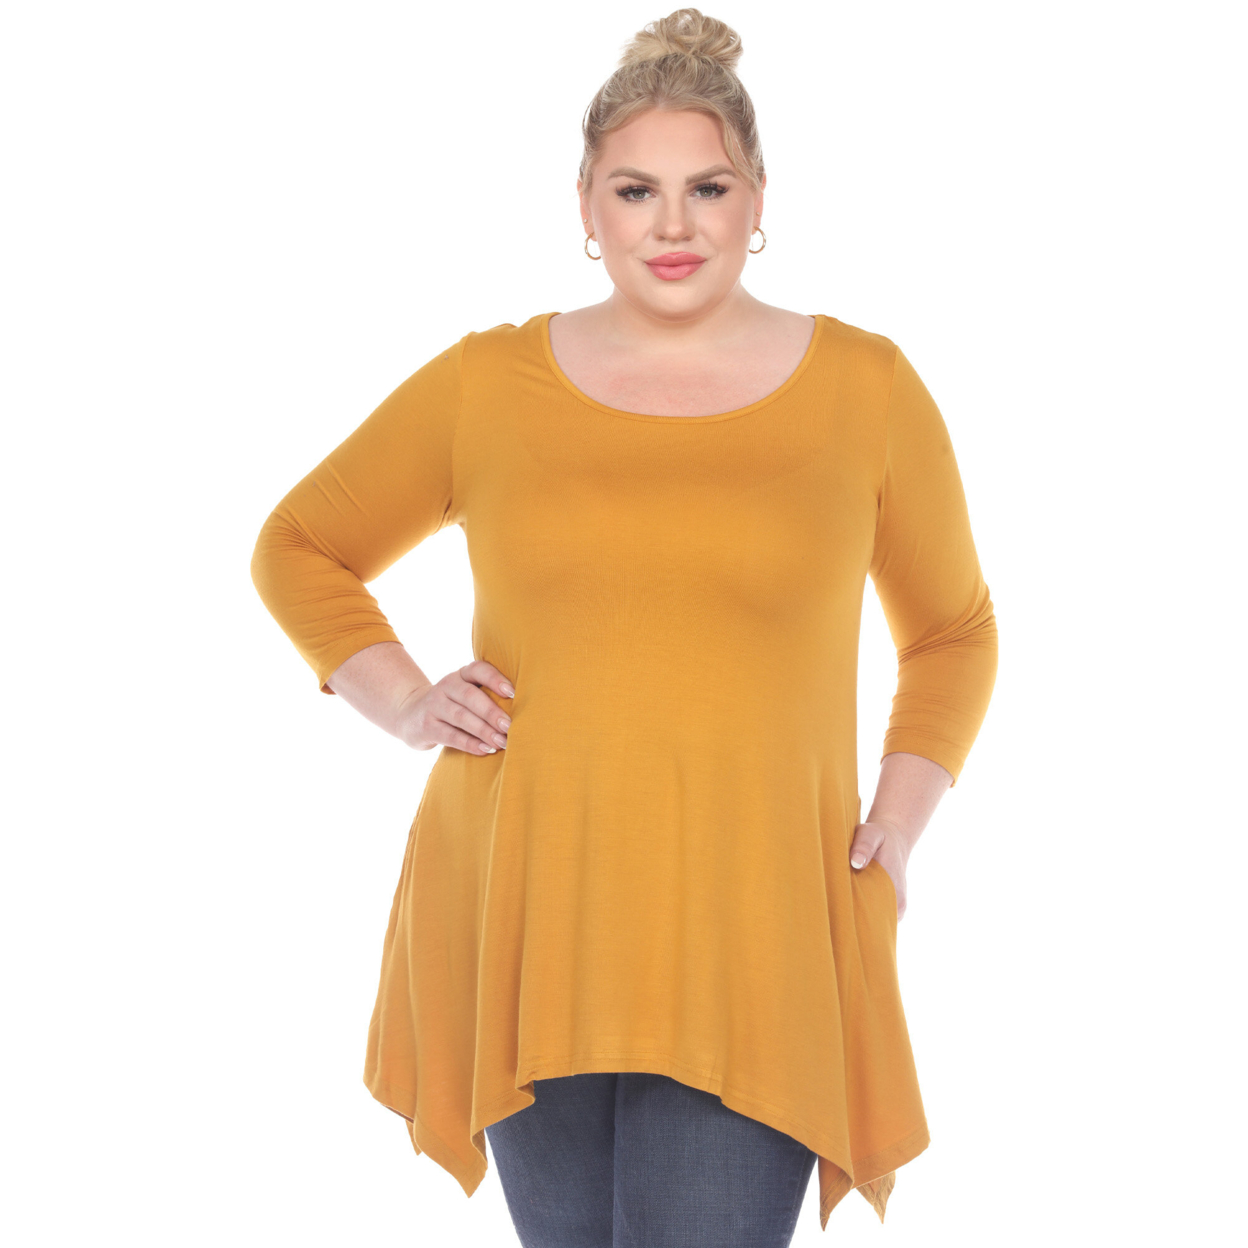 White Mark Women's Quarter Sleeve Tunic Top With Pockets - Mustard, 1X